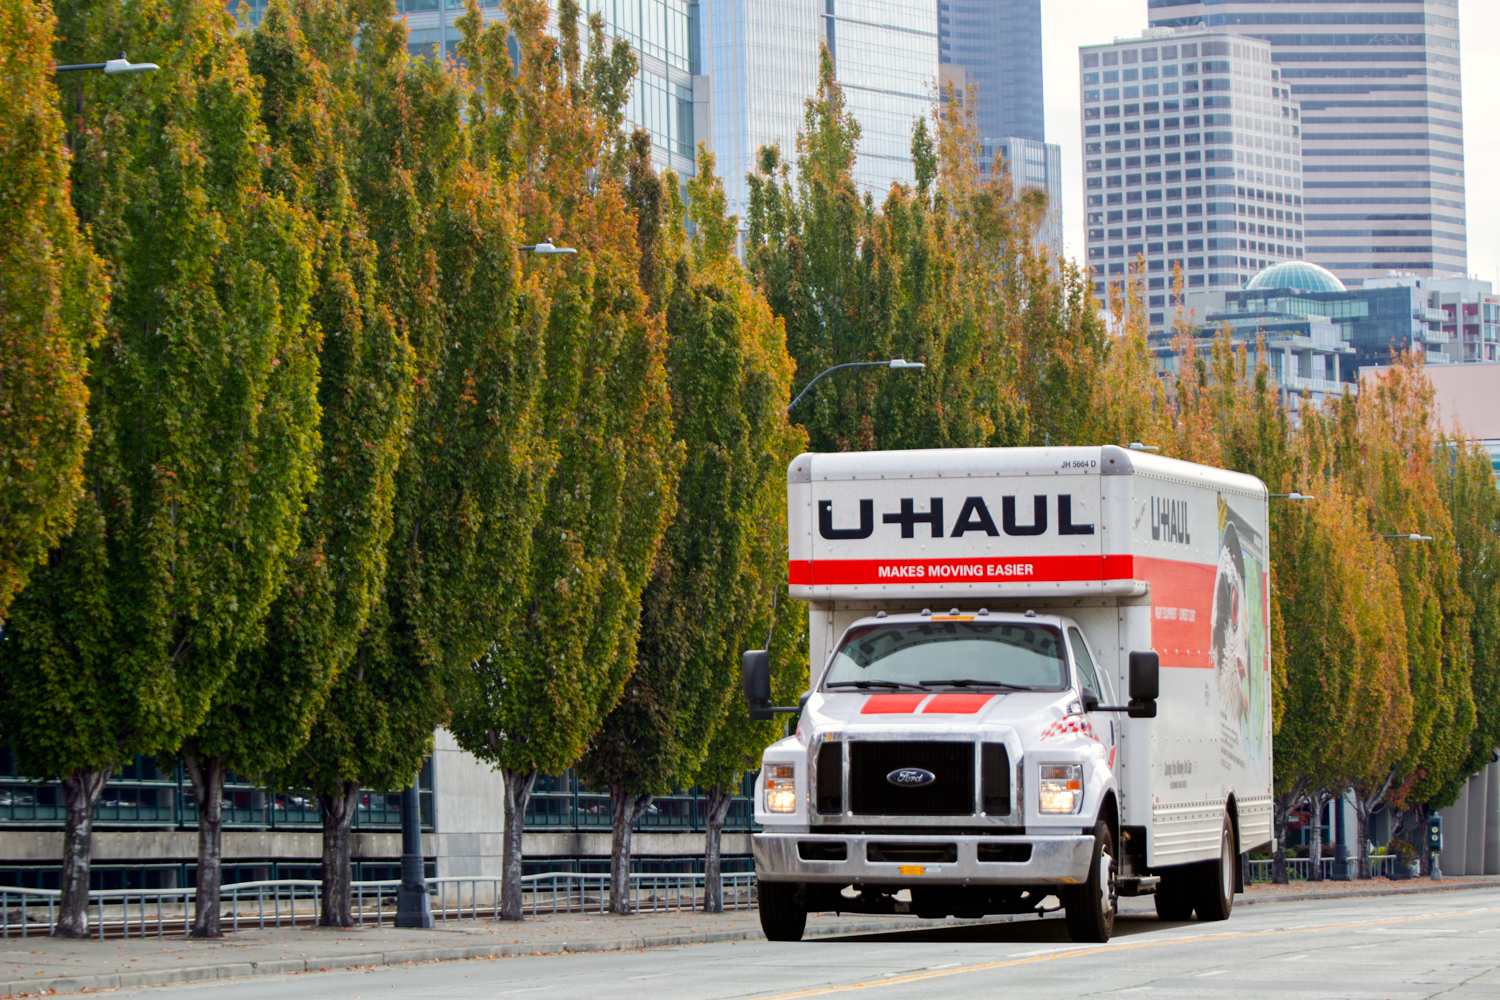 U-Haul sees more traffic to Cornwall in 2021